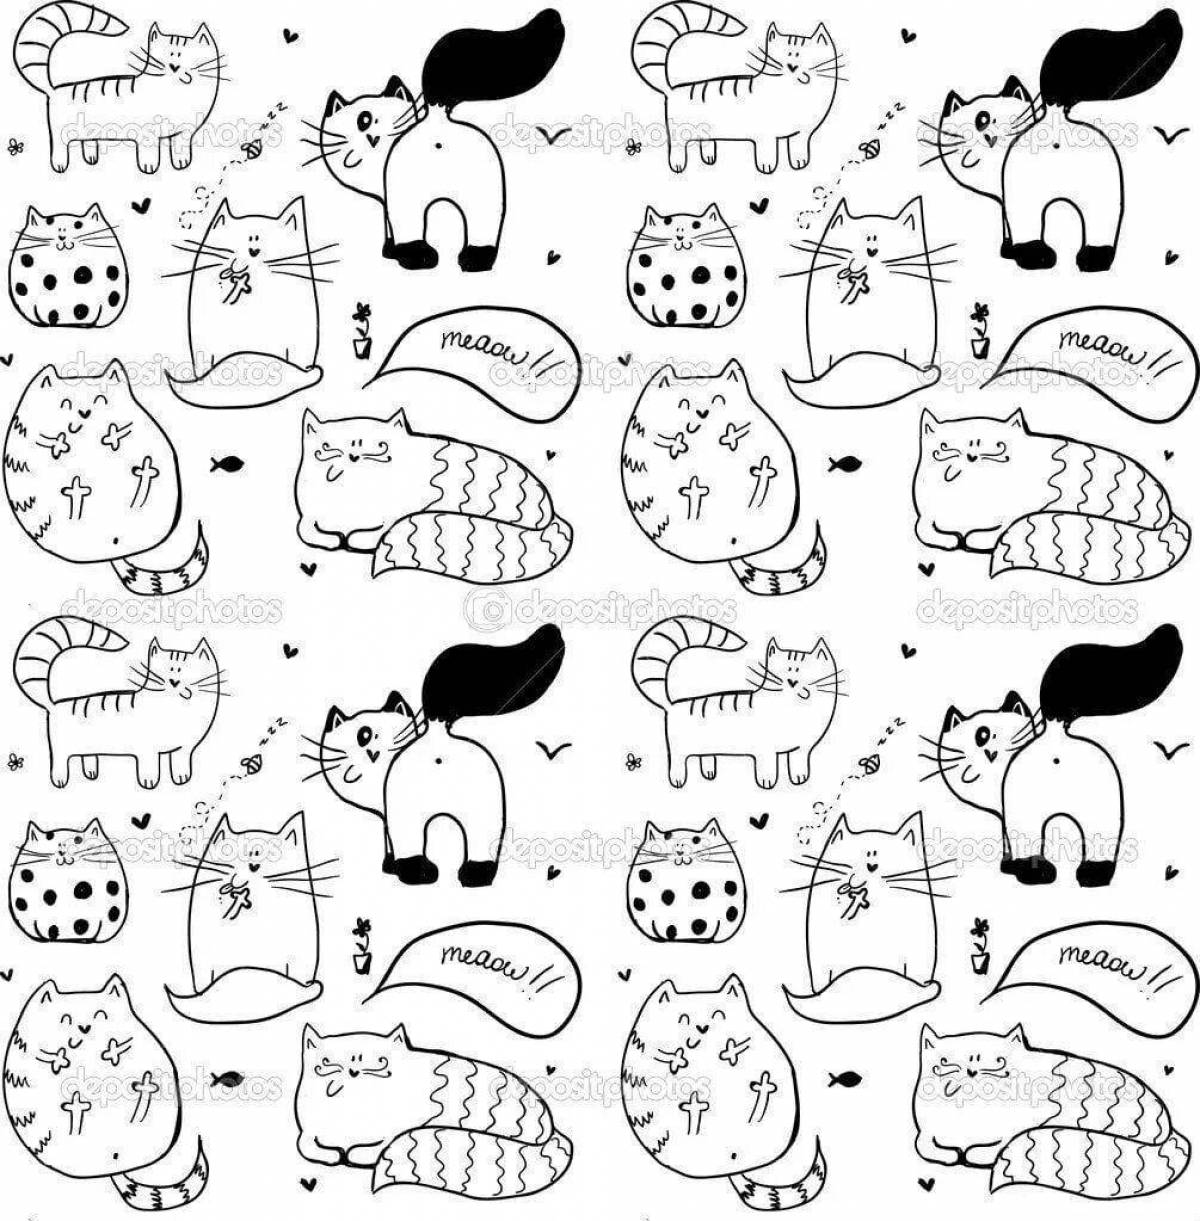 Coloring book playful cat sticker